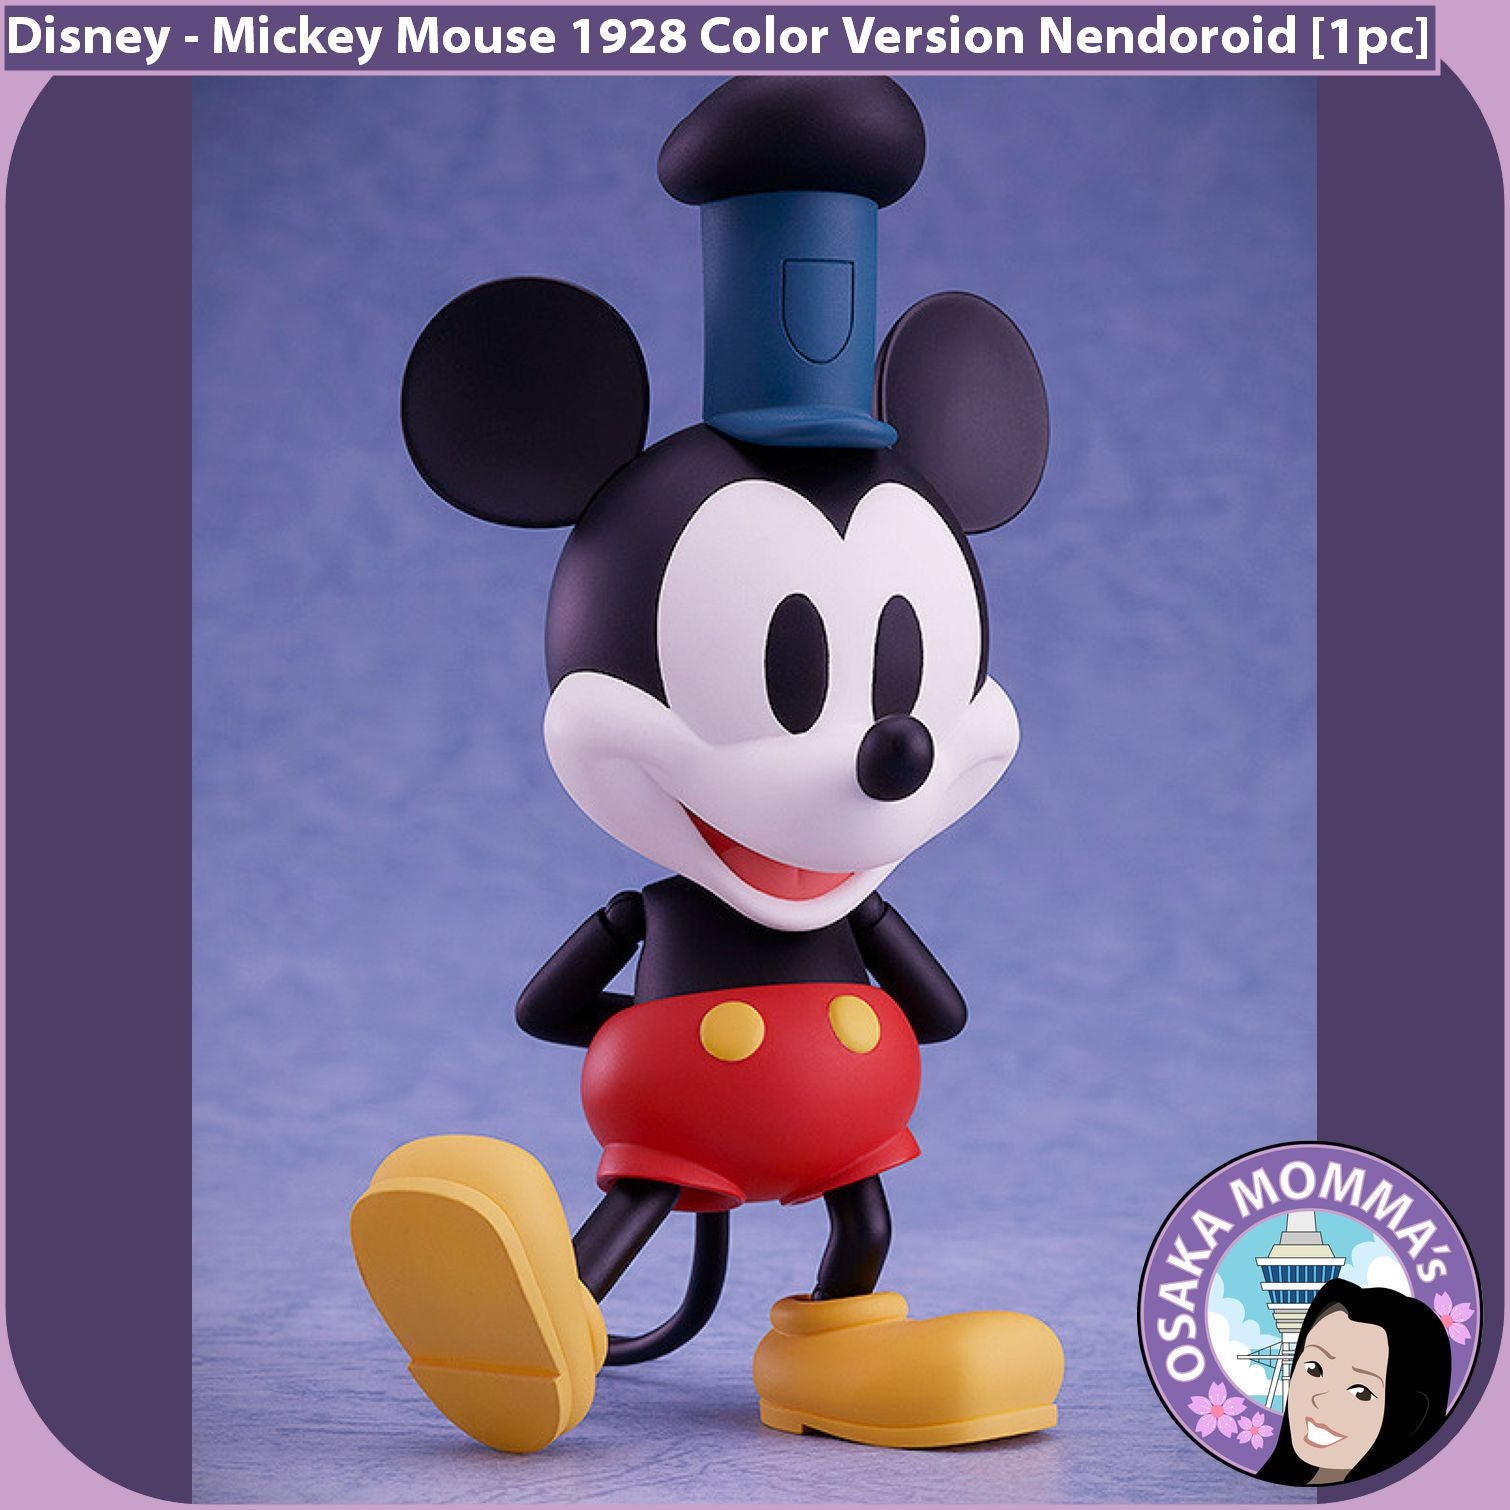 Mickey Mouse 1928 Version Nendoroid 1010